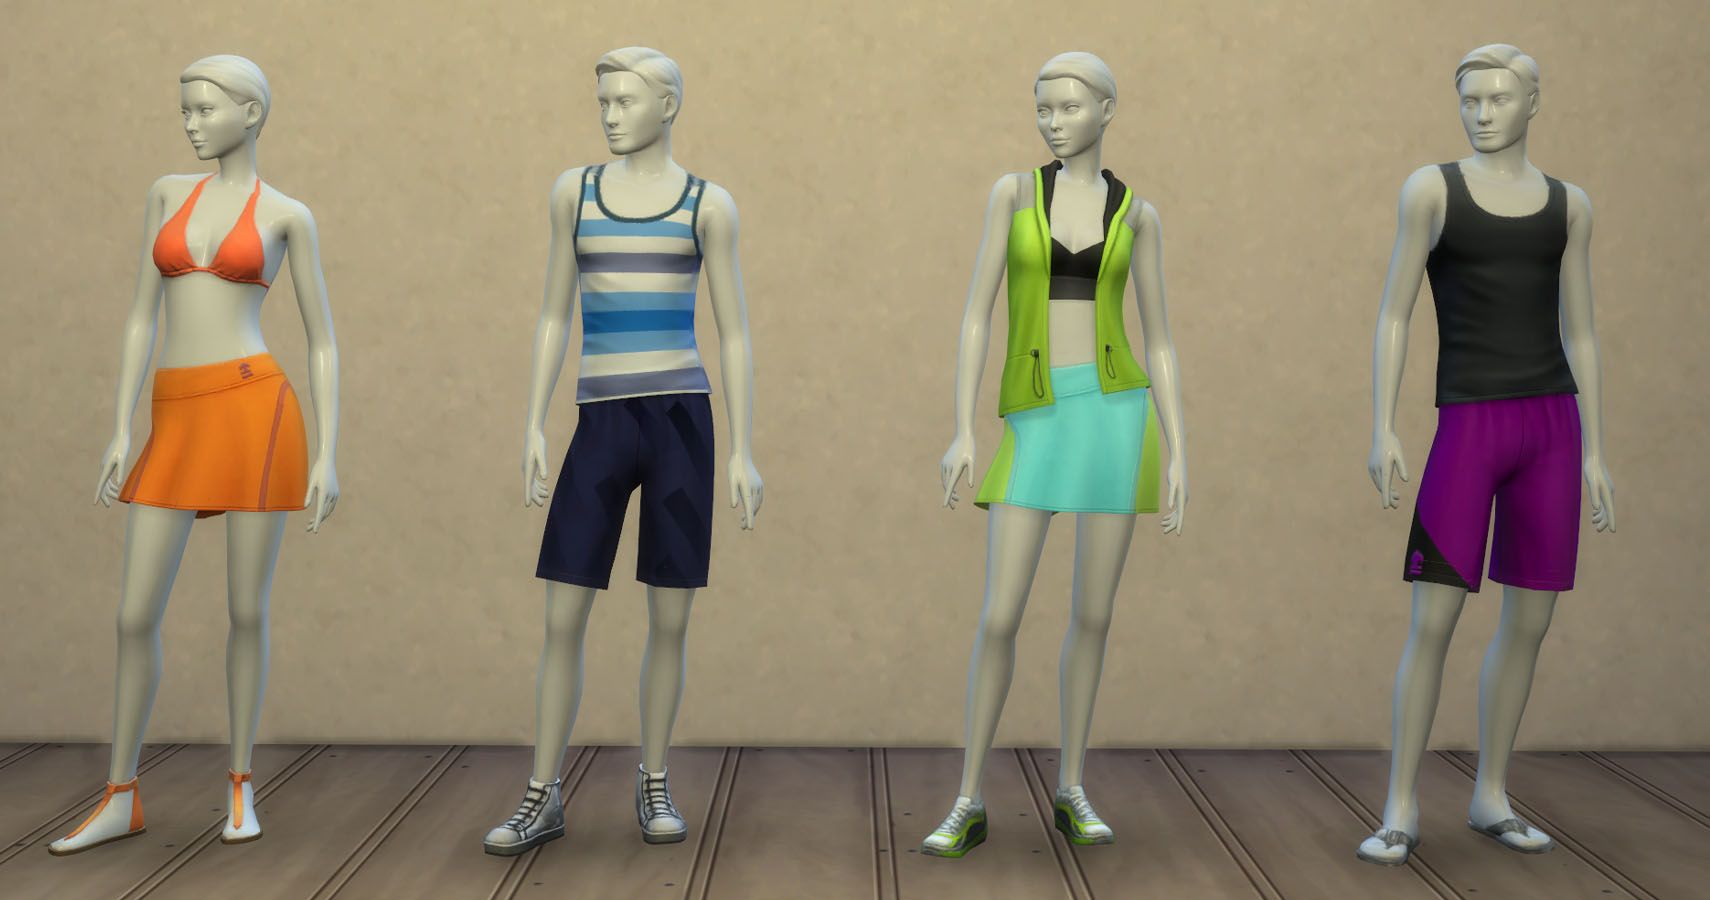 The Sims 4: The Best Items You Can Only Get In Fitness Stuff